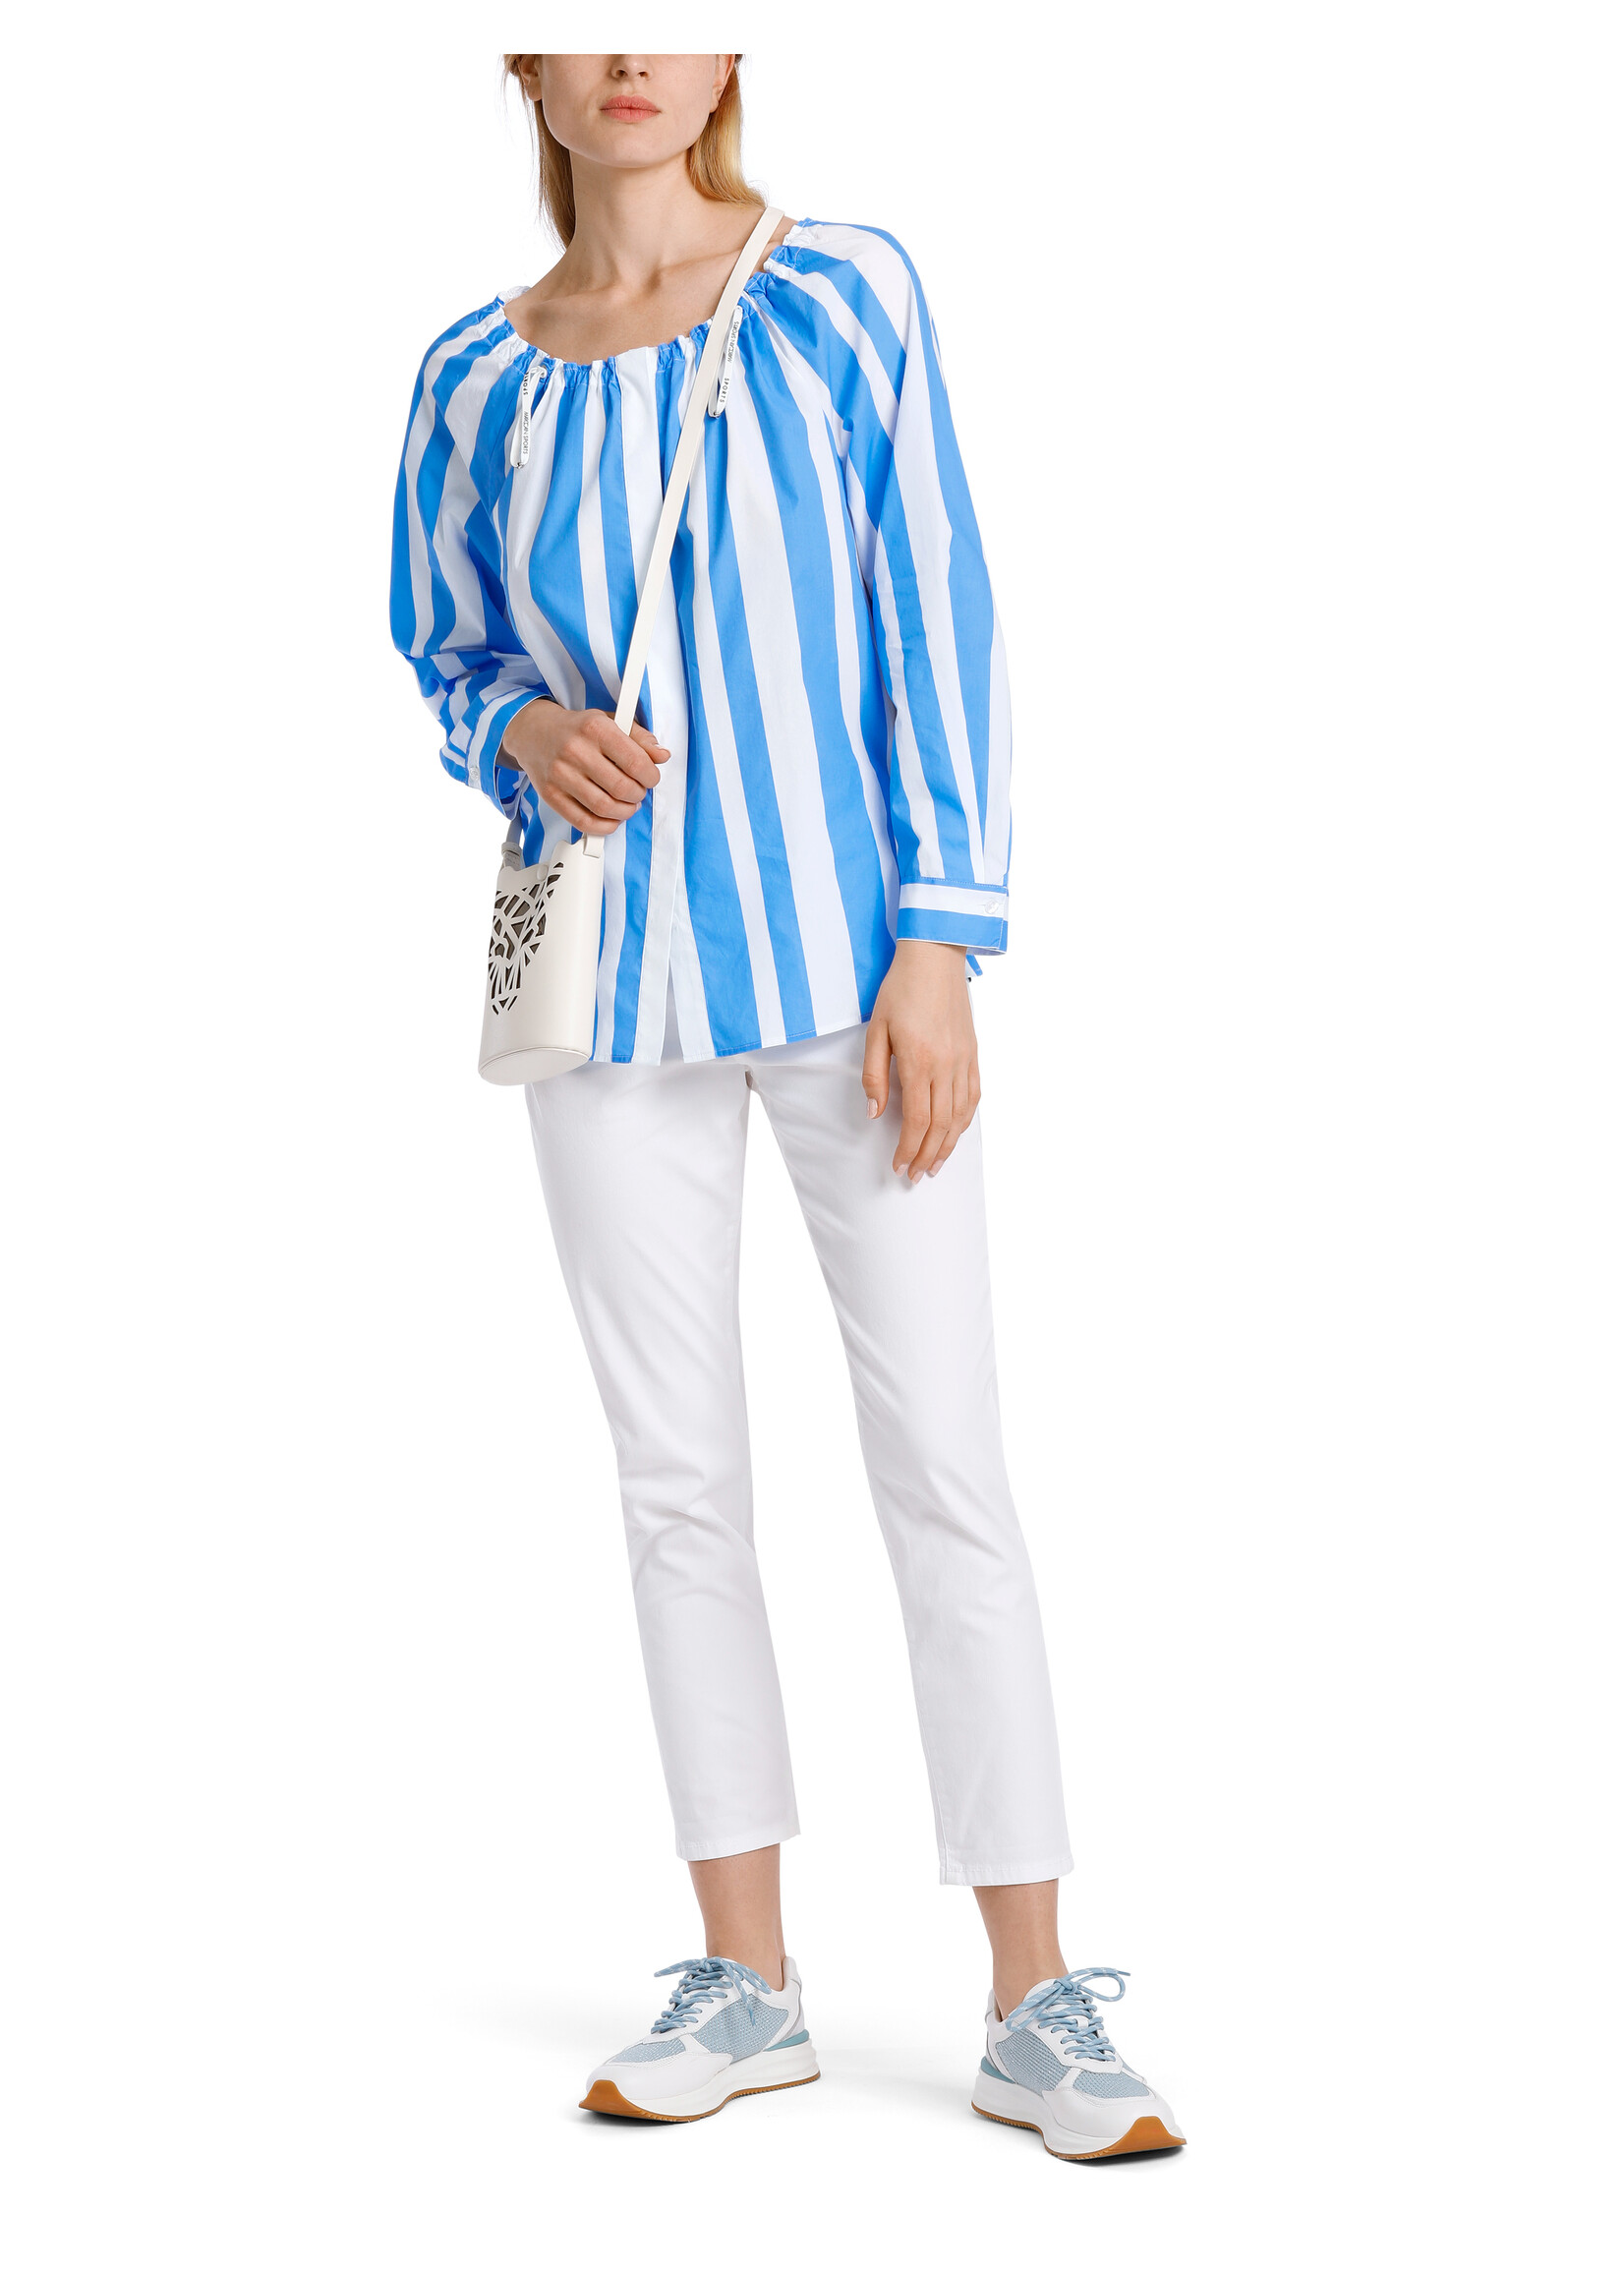 Marccain Sports Blouse WS 51.30 W84 363